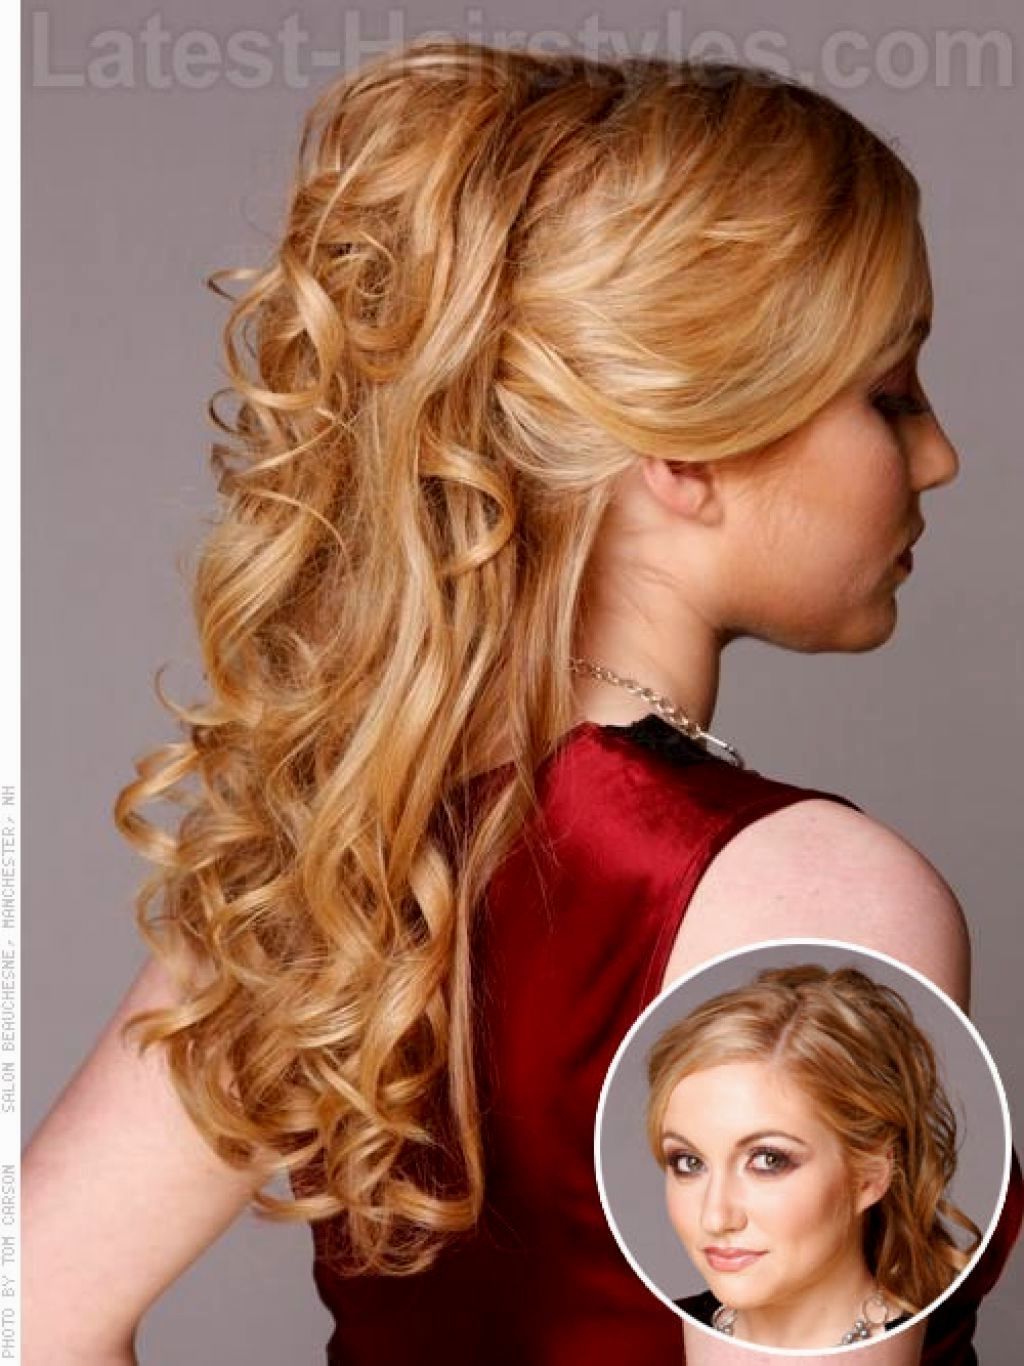 Hairstyles Ideas Trends (View 10 of 15)